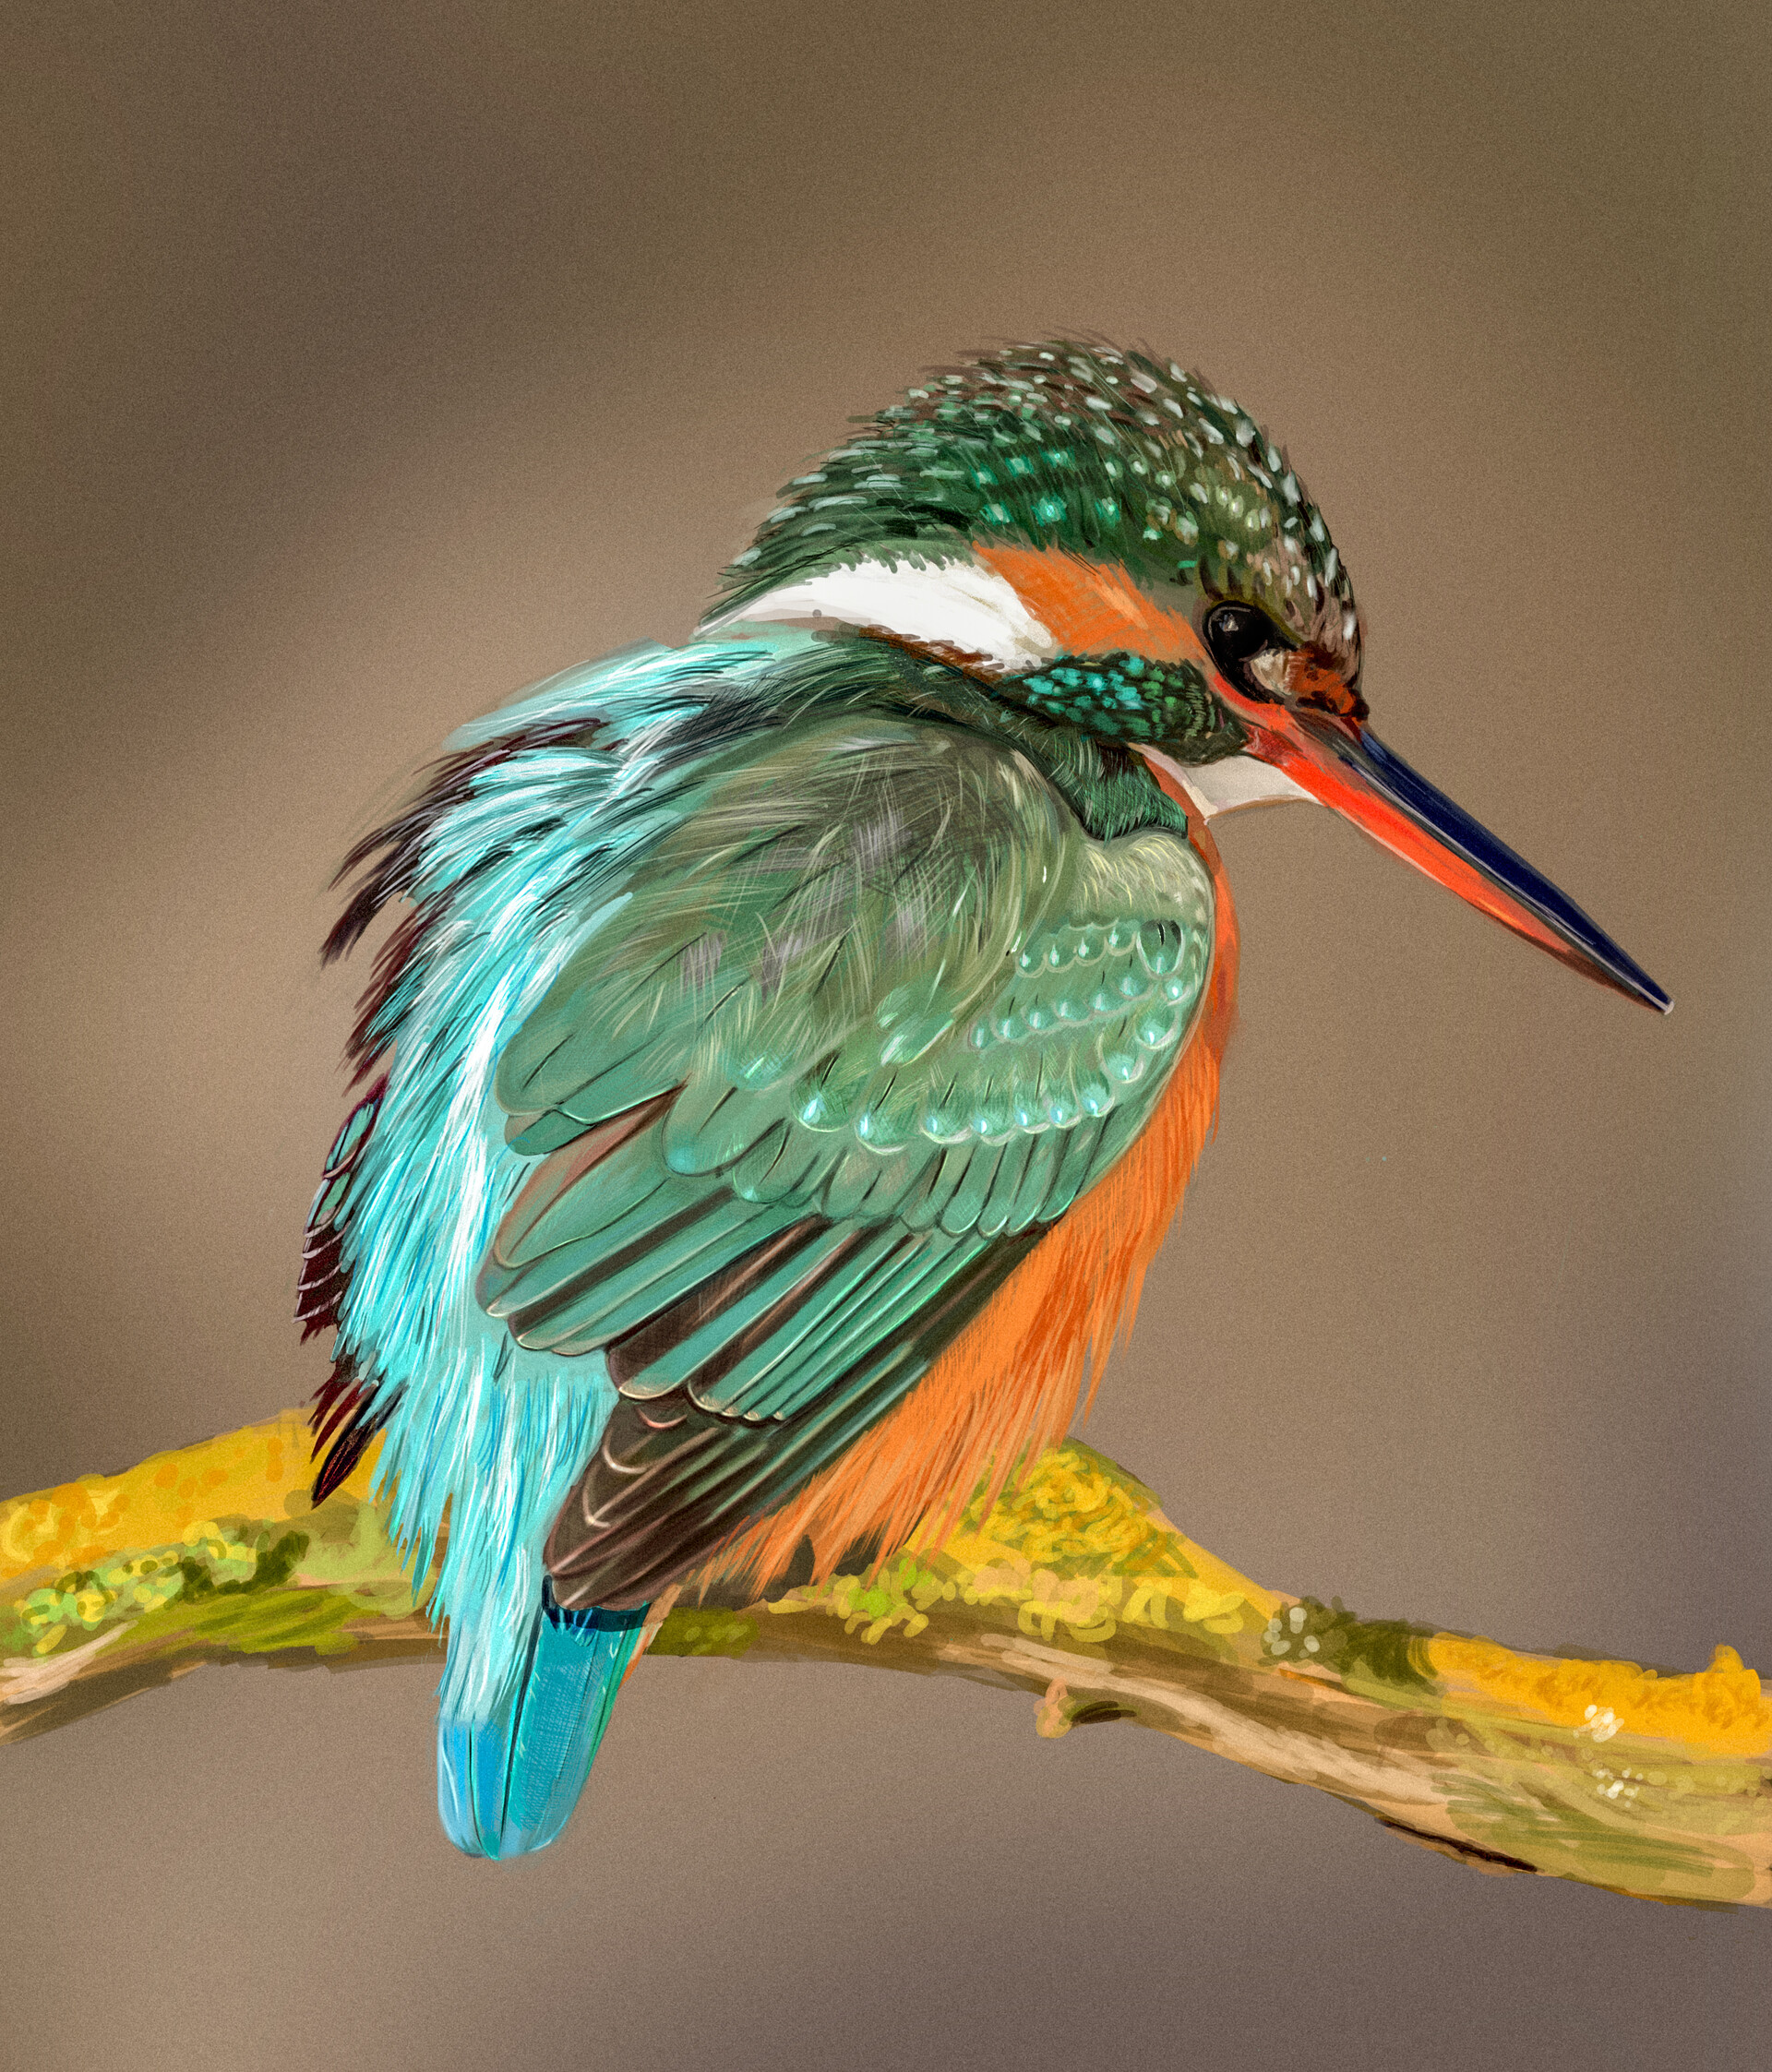 A kingfisher painting: an encounter turned into a sketch – Julia Bausenhardt